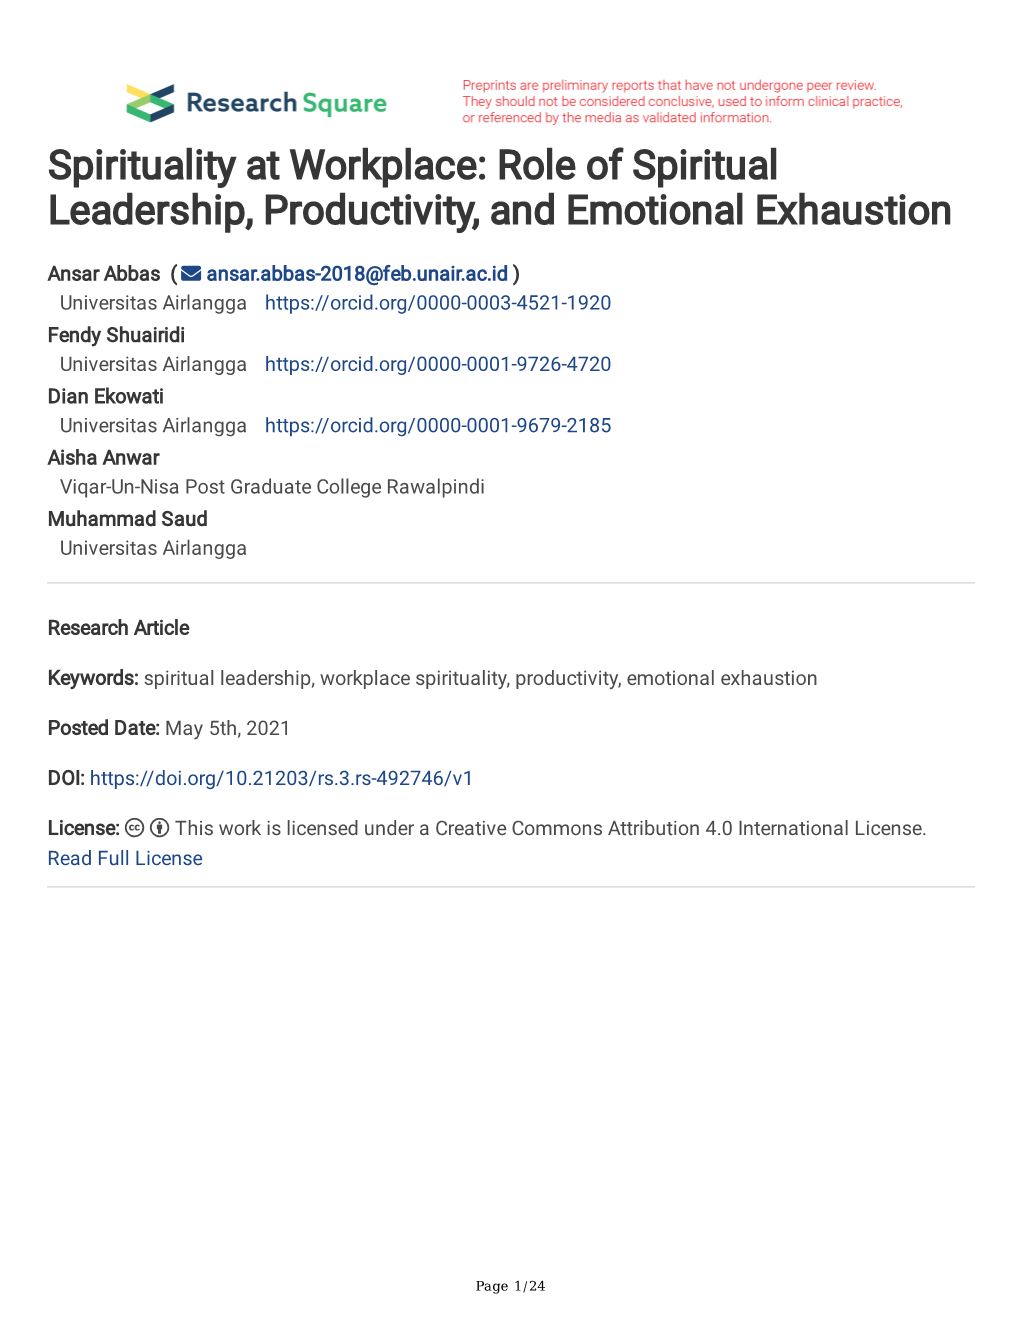 Role of Spiritual Leadership, Productivity, and Emotional Exhaustion